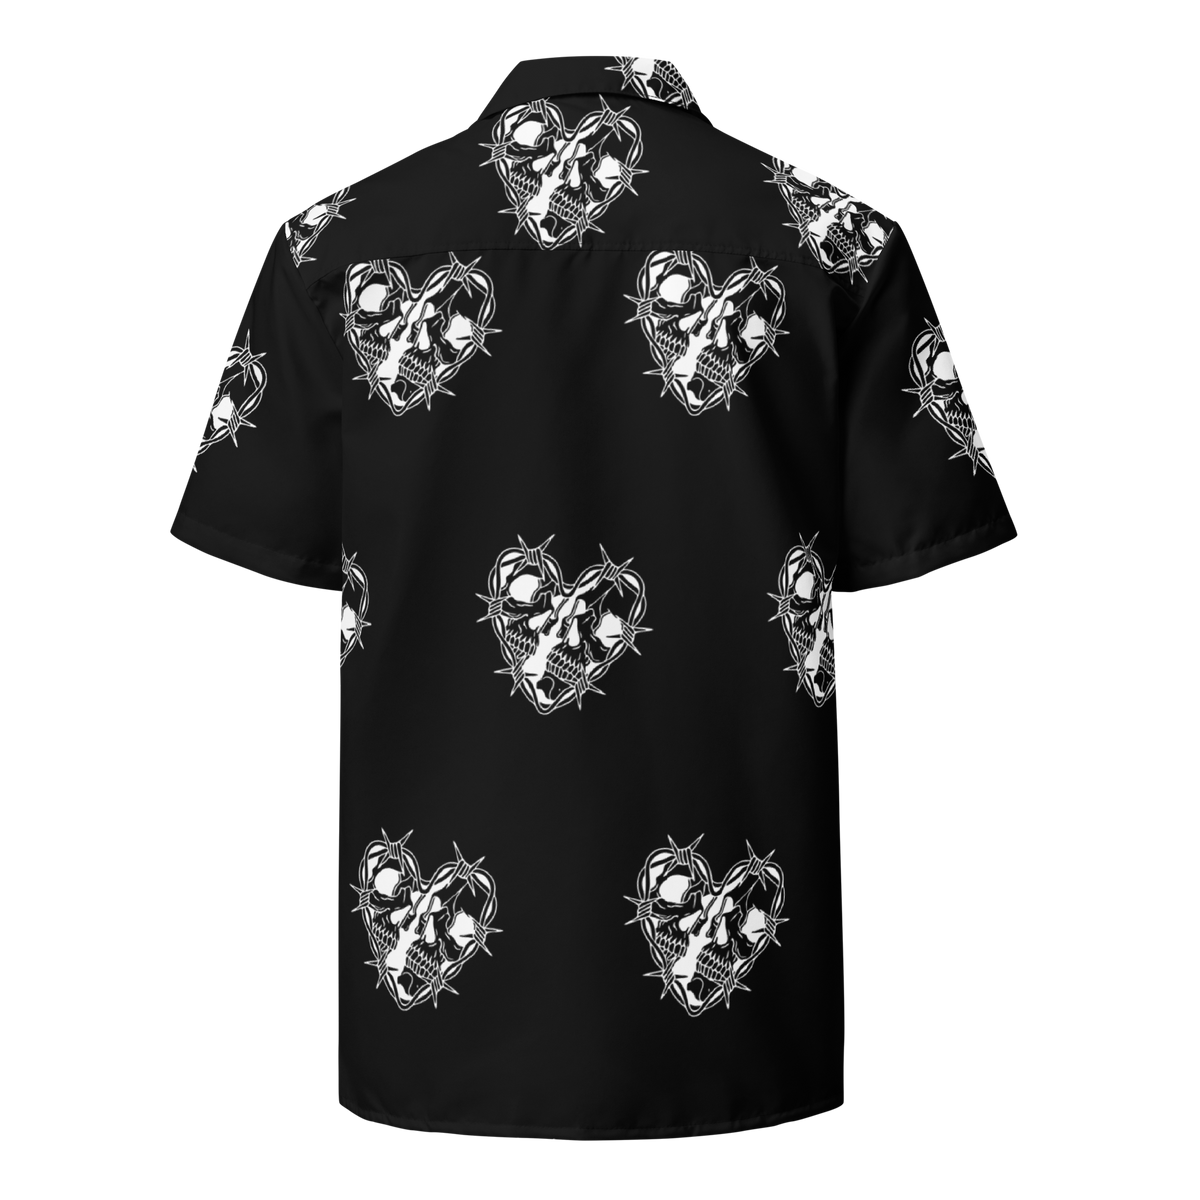 Rebellious Romance, Oversized Button Shirt, Skull Print, Heart with Spines, Edgy Fashion, Romantic Style, Statement Piece, Bold Print, Urban Flair, Trendy Apparel, Unique Design, Streetwear, Fashion Forward, Skull Fashion, Heart Print Shirt, Edgy Romance, Contemporary Fashion, Eye-catching Shirt, Street Style, Urban Chic, button up shirt